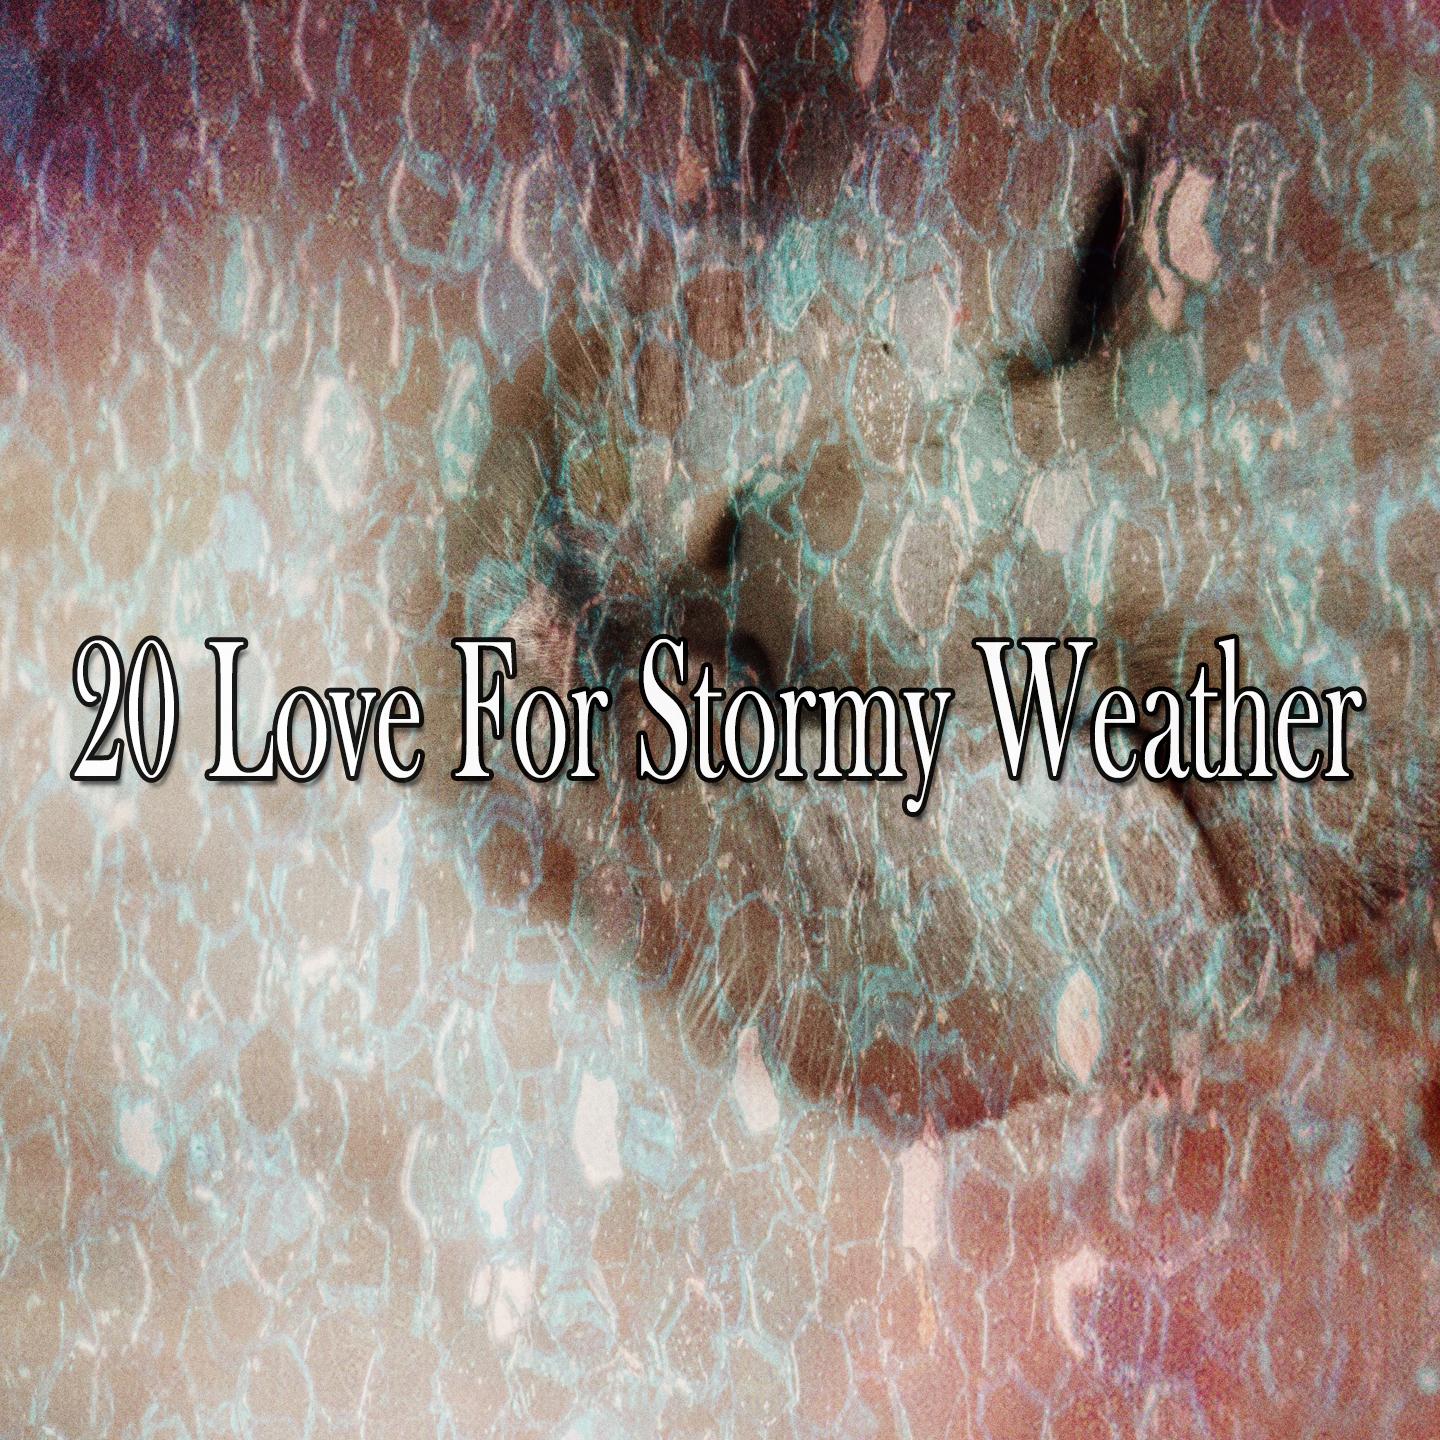 20 Love for Stormy Weather